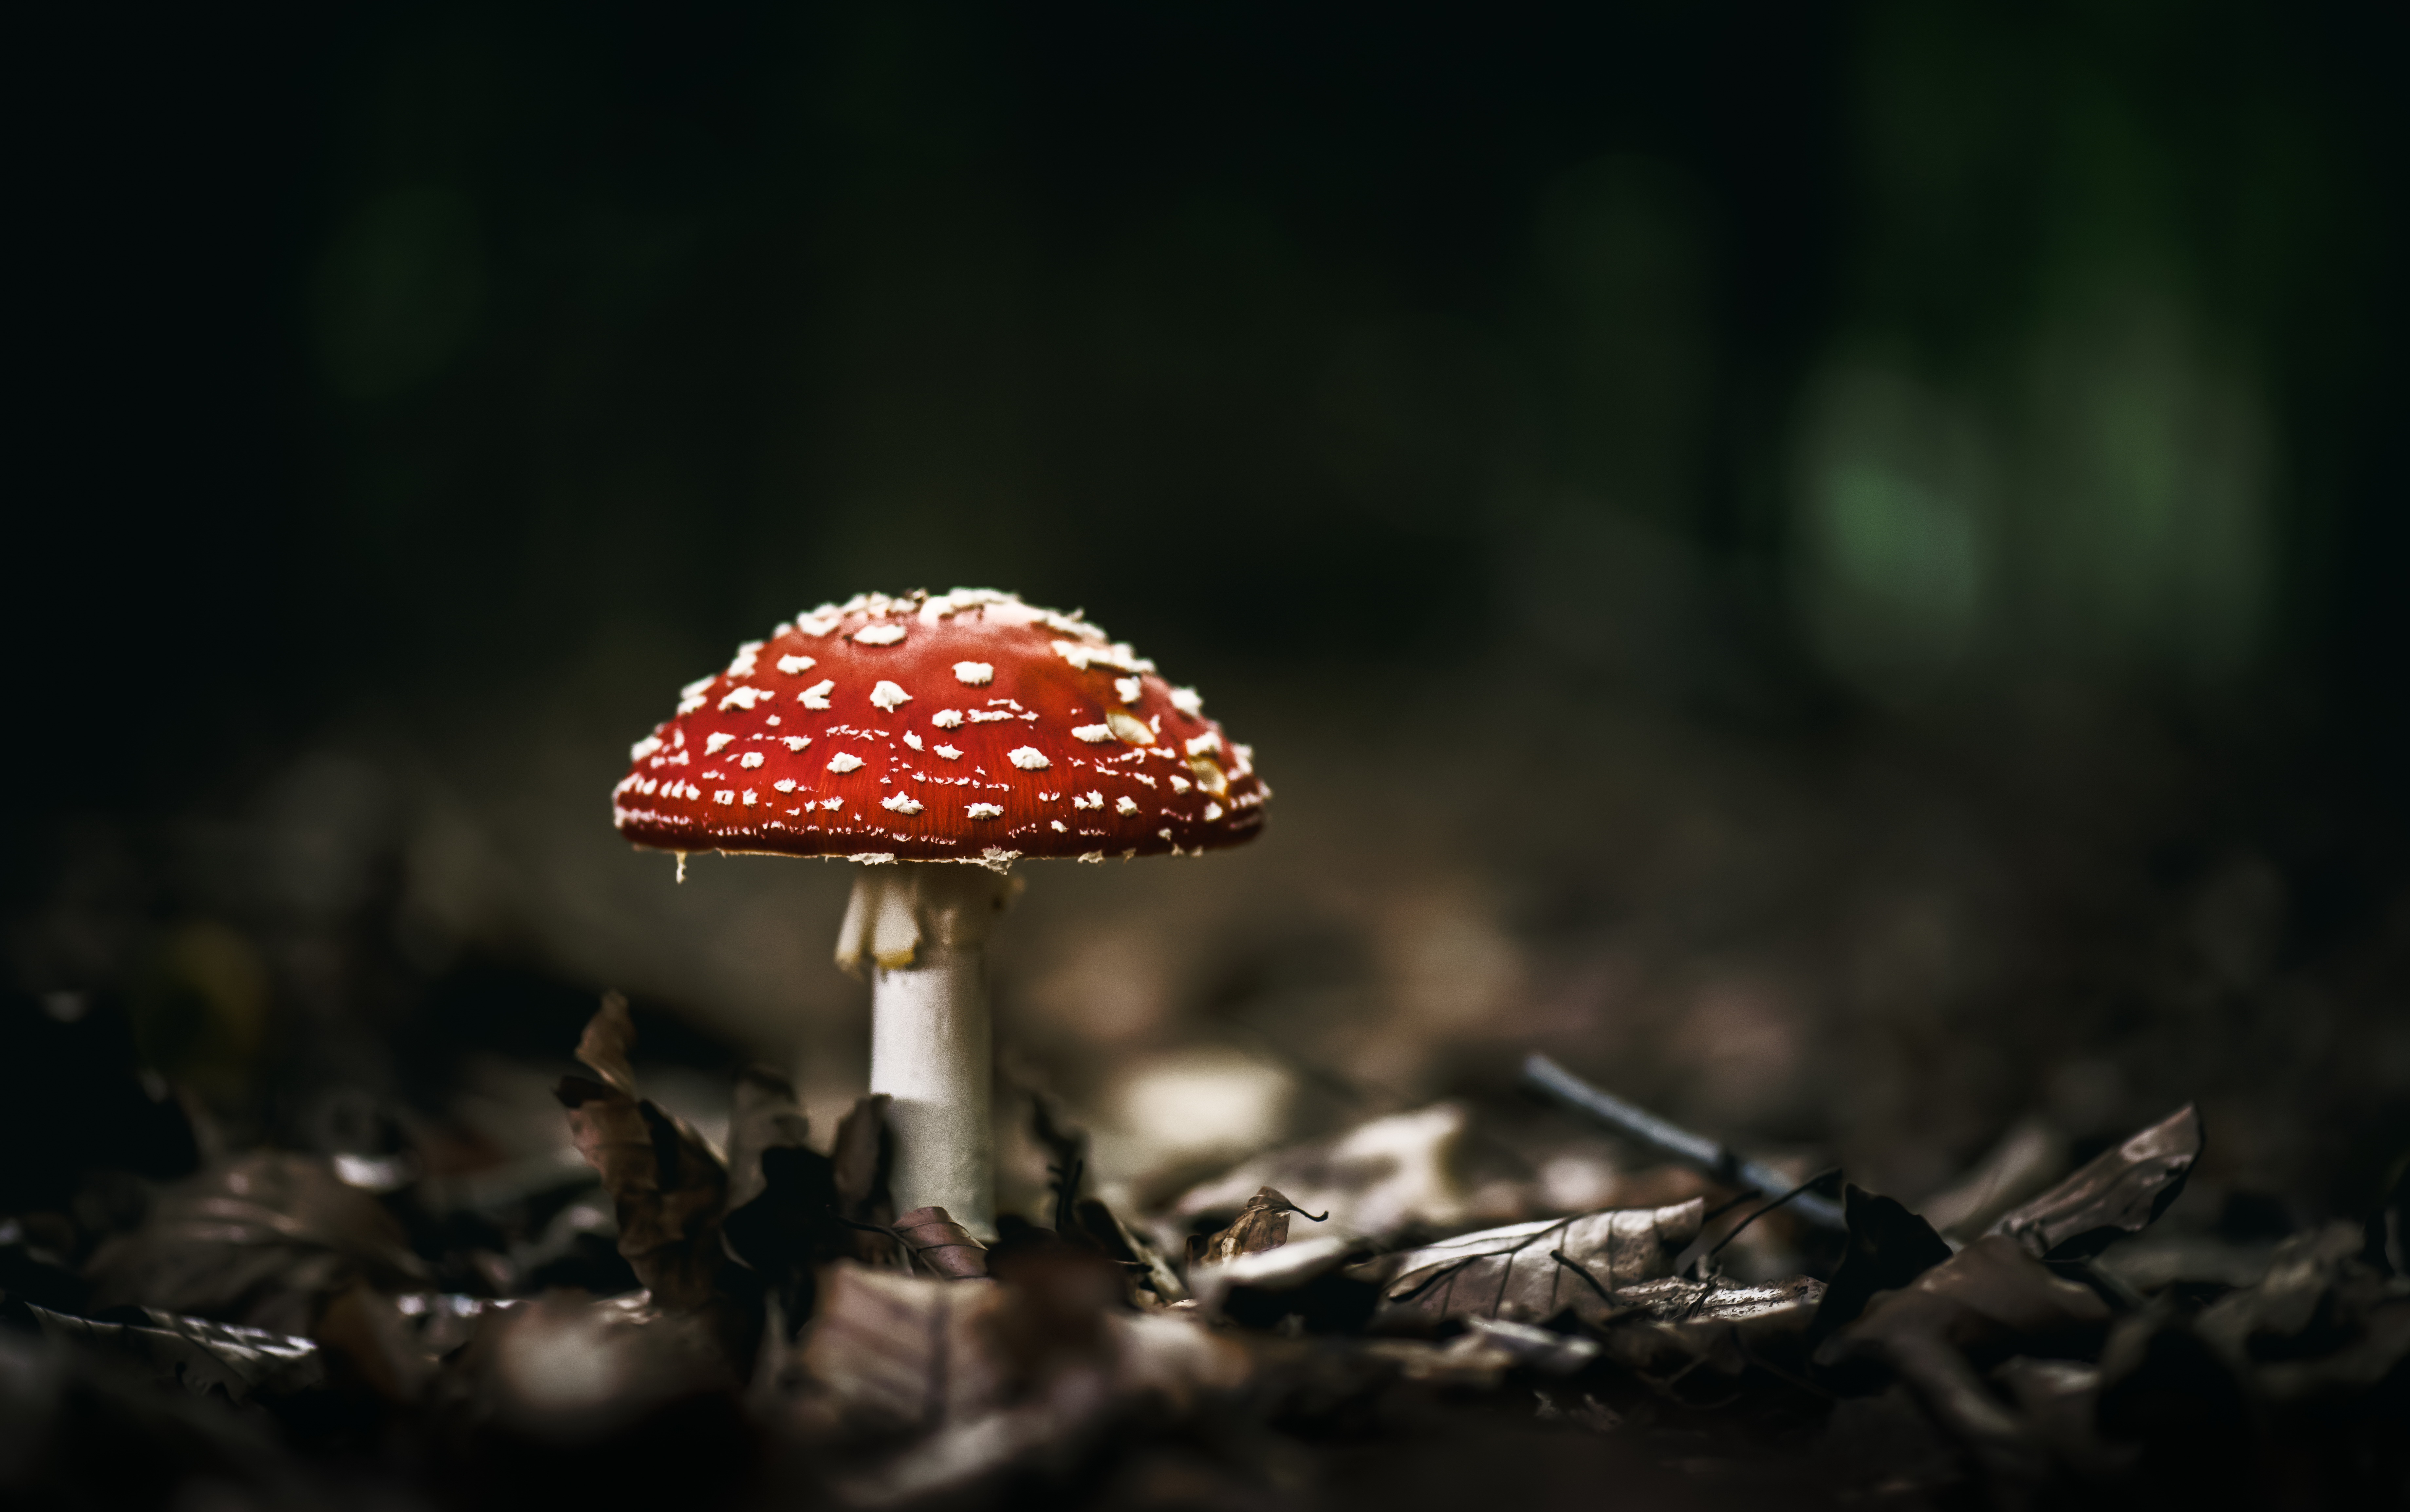 Mushroom HD Wallpapers and Backgrounds. 